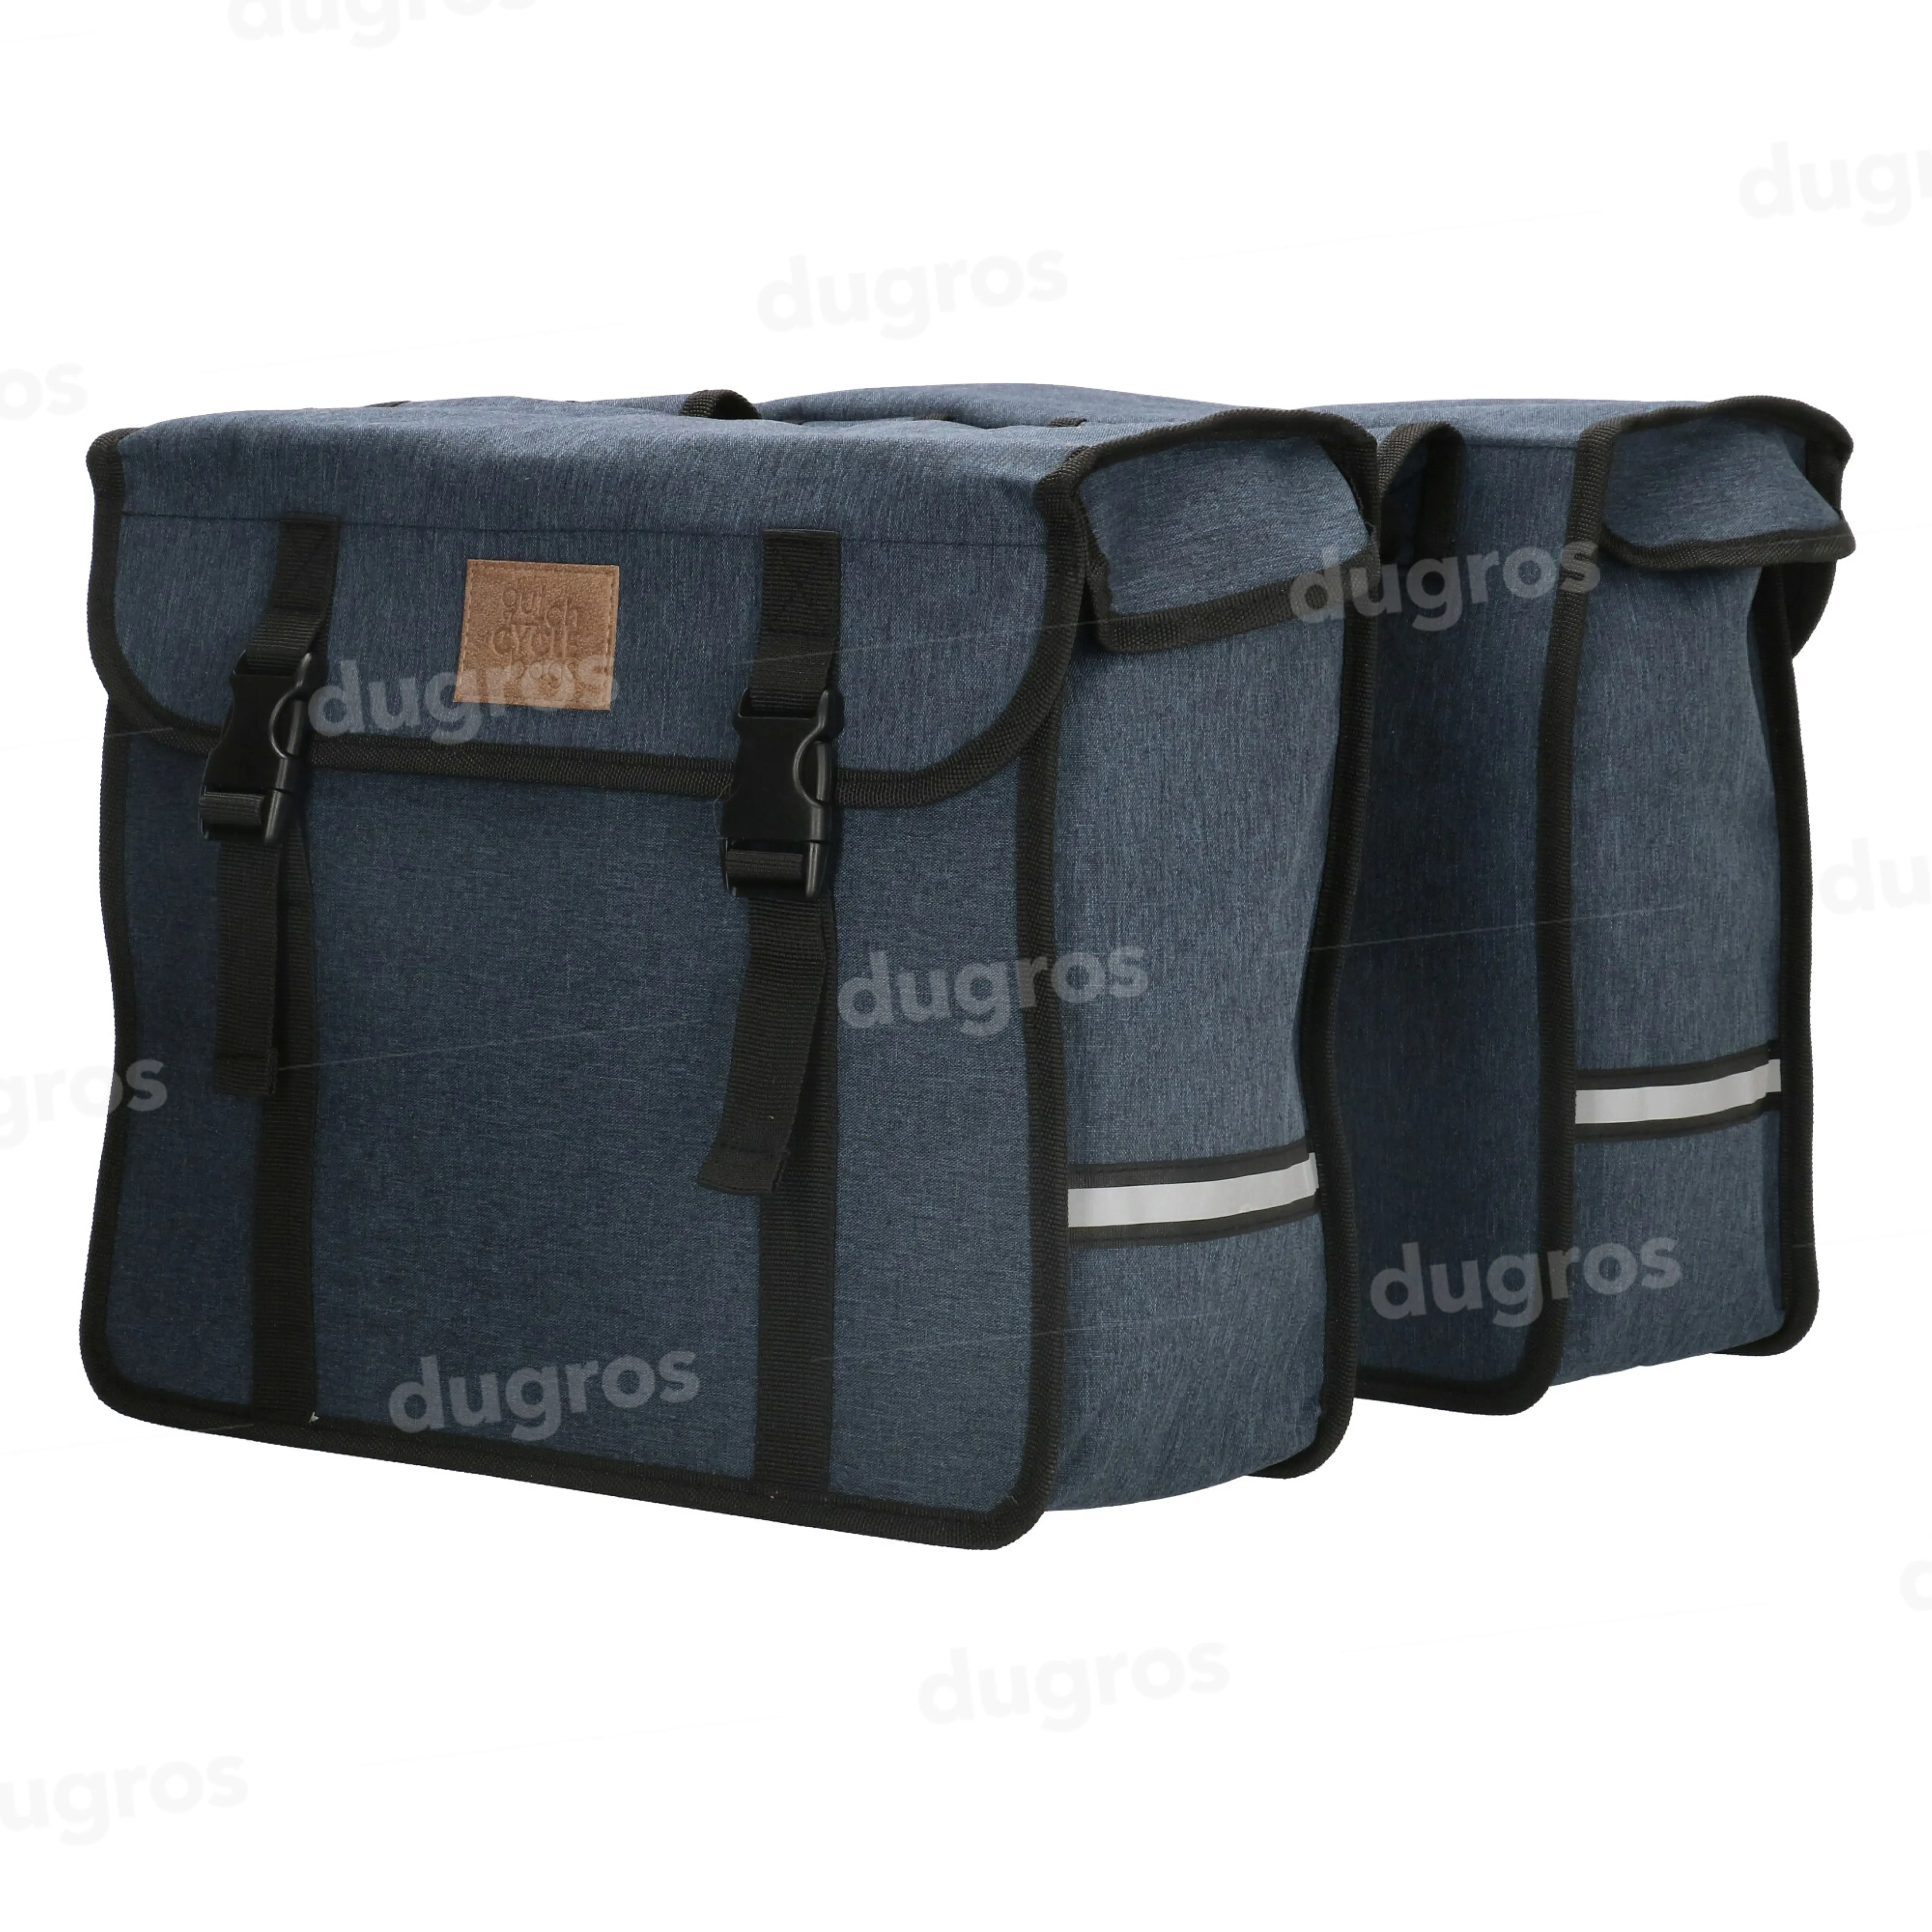 High Quality double bicycle bag from Dutch Cycle Bags pannier luggage carrier 40L